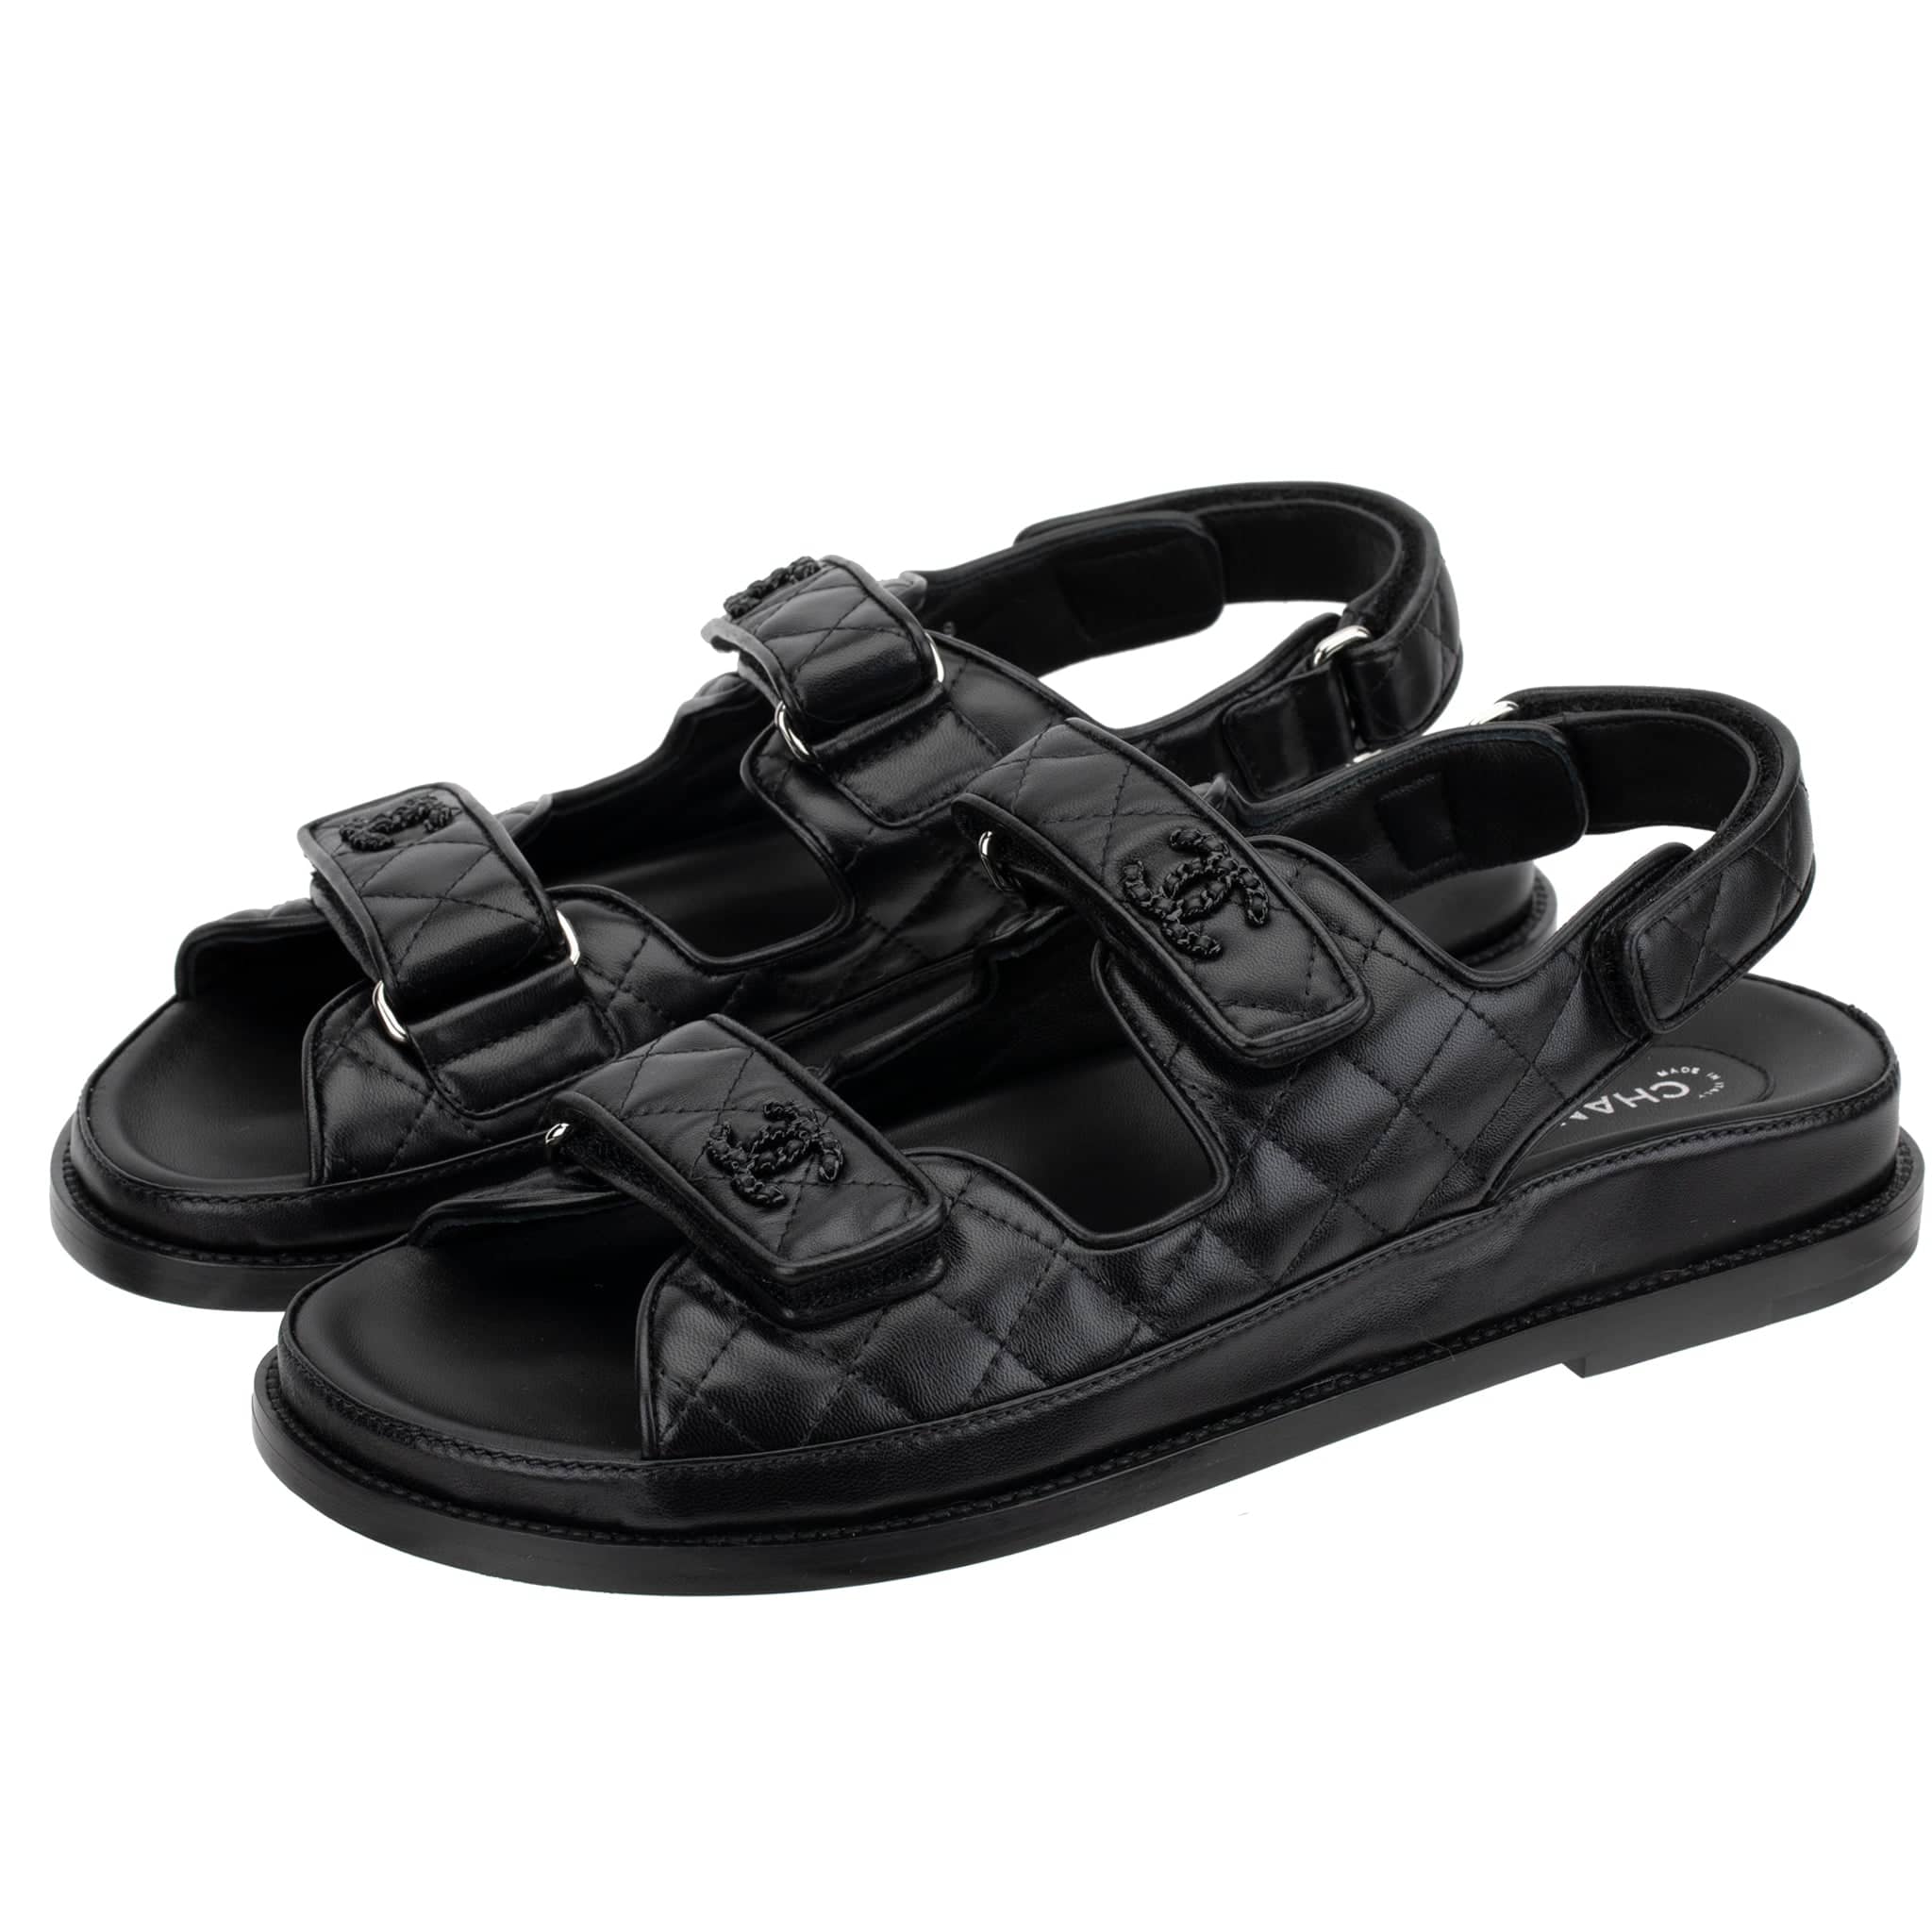 Sizing prices and more  A Chanel dad sandals review